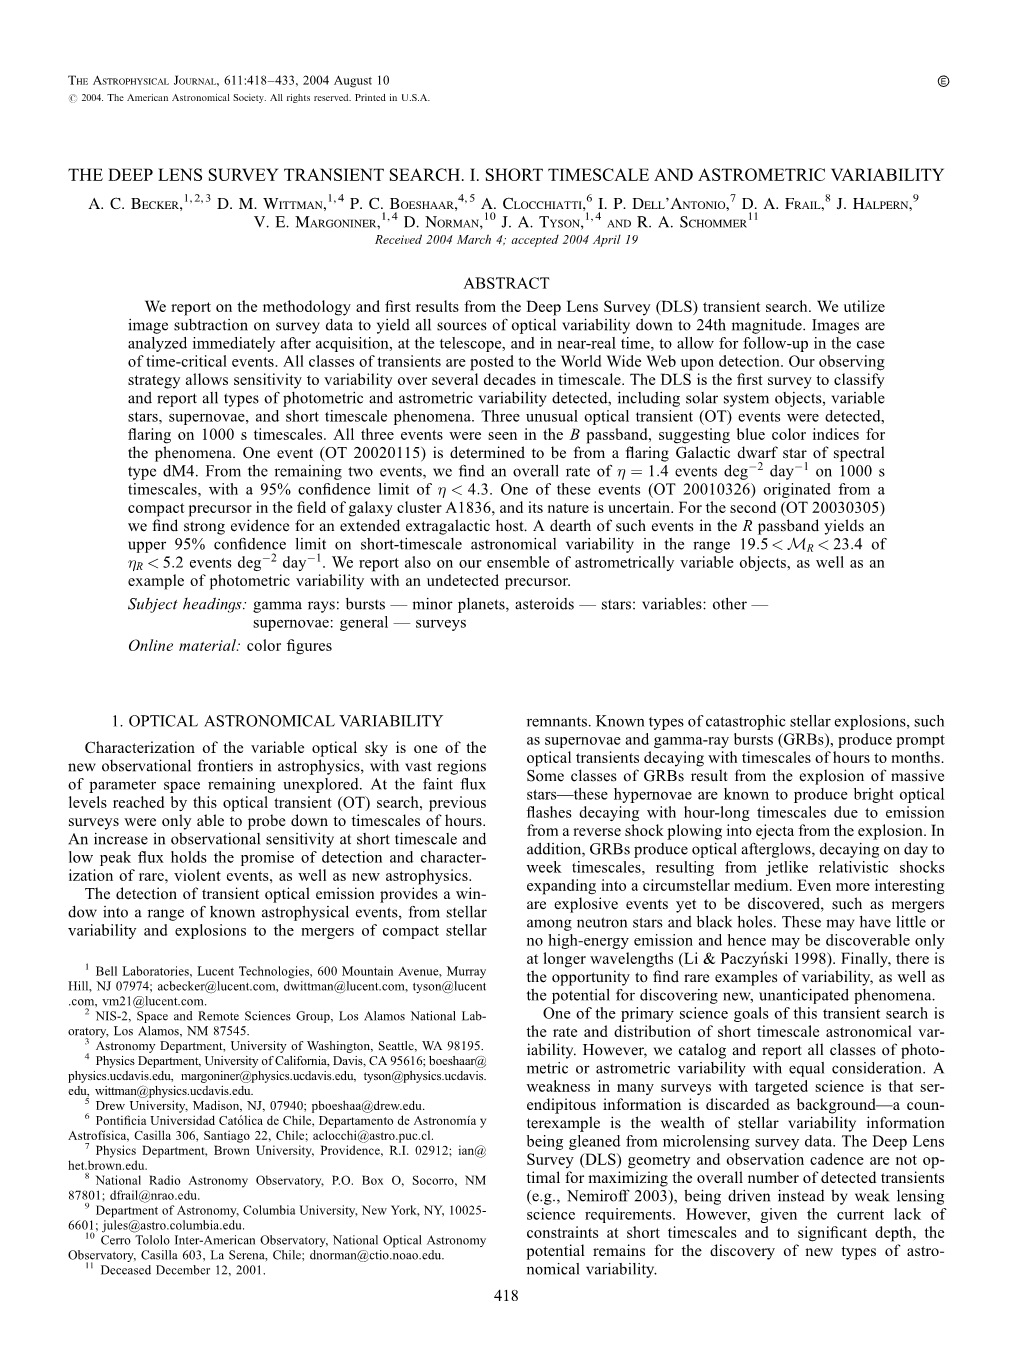 The Deep Lens Survey Transient Search. I. Short Timescale and Astrometric Variability A